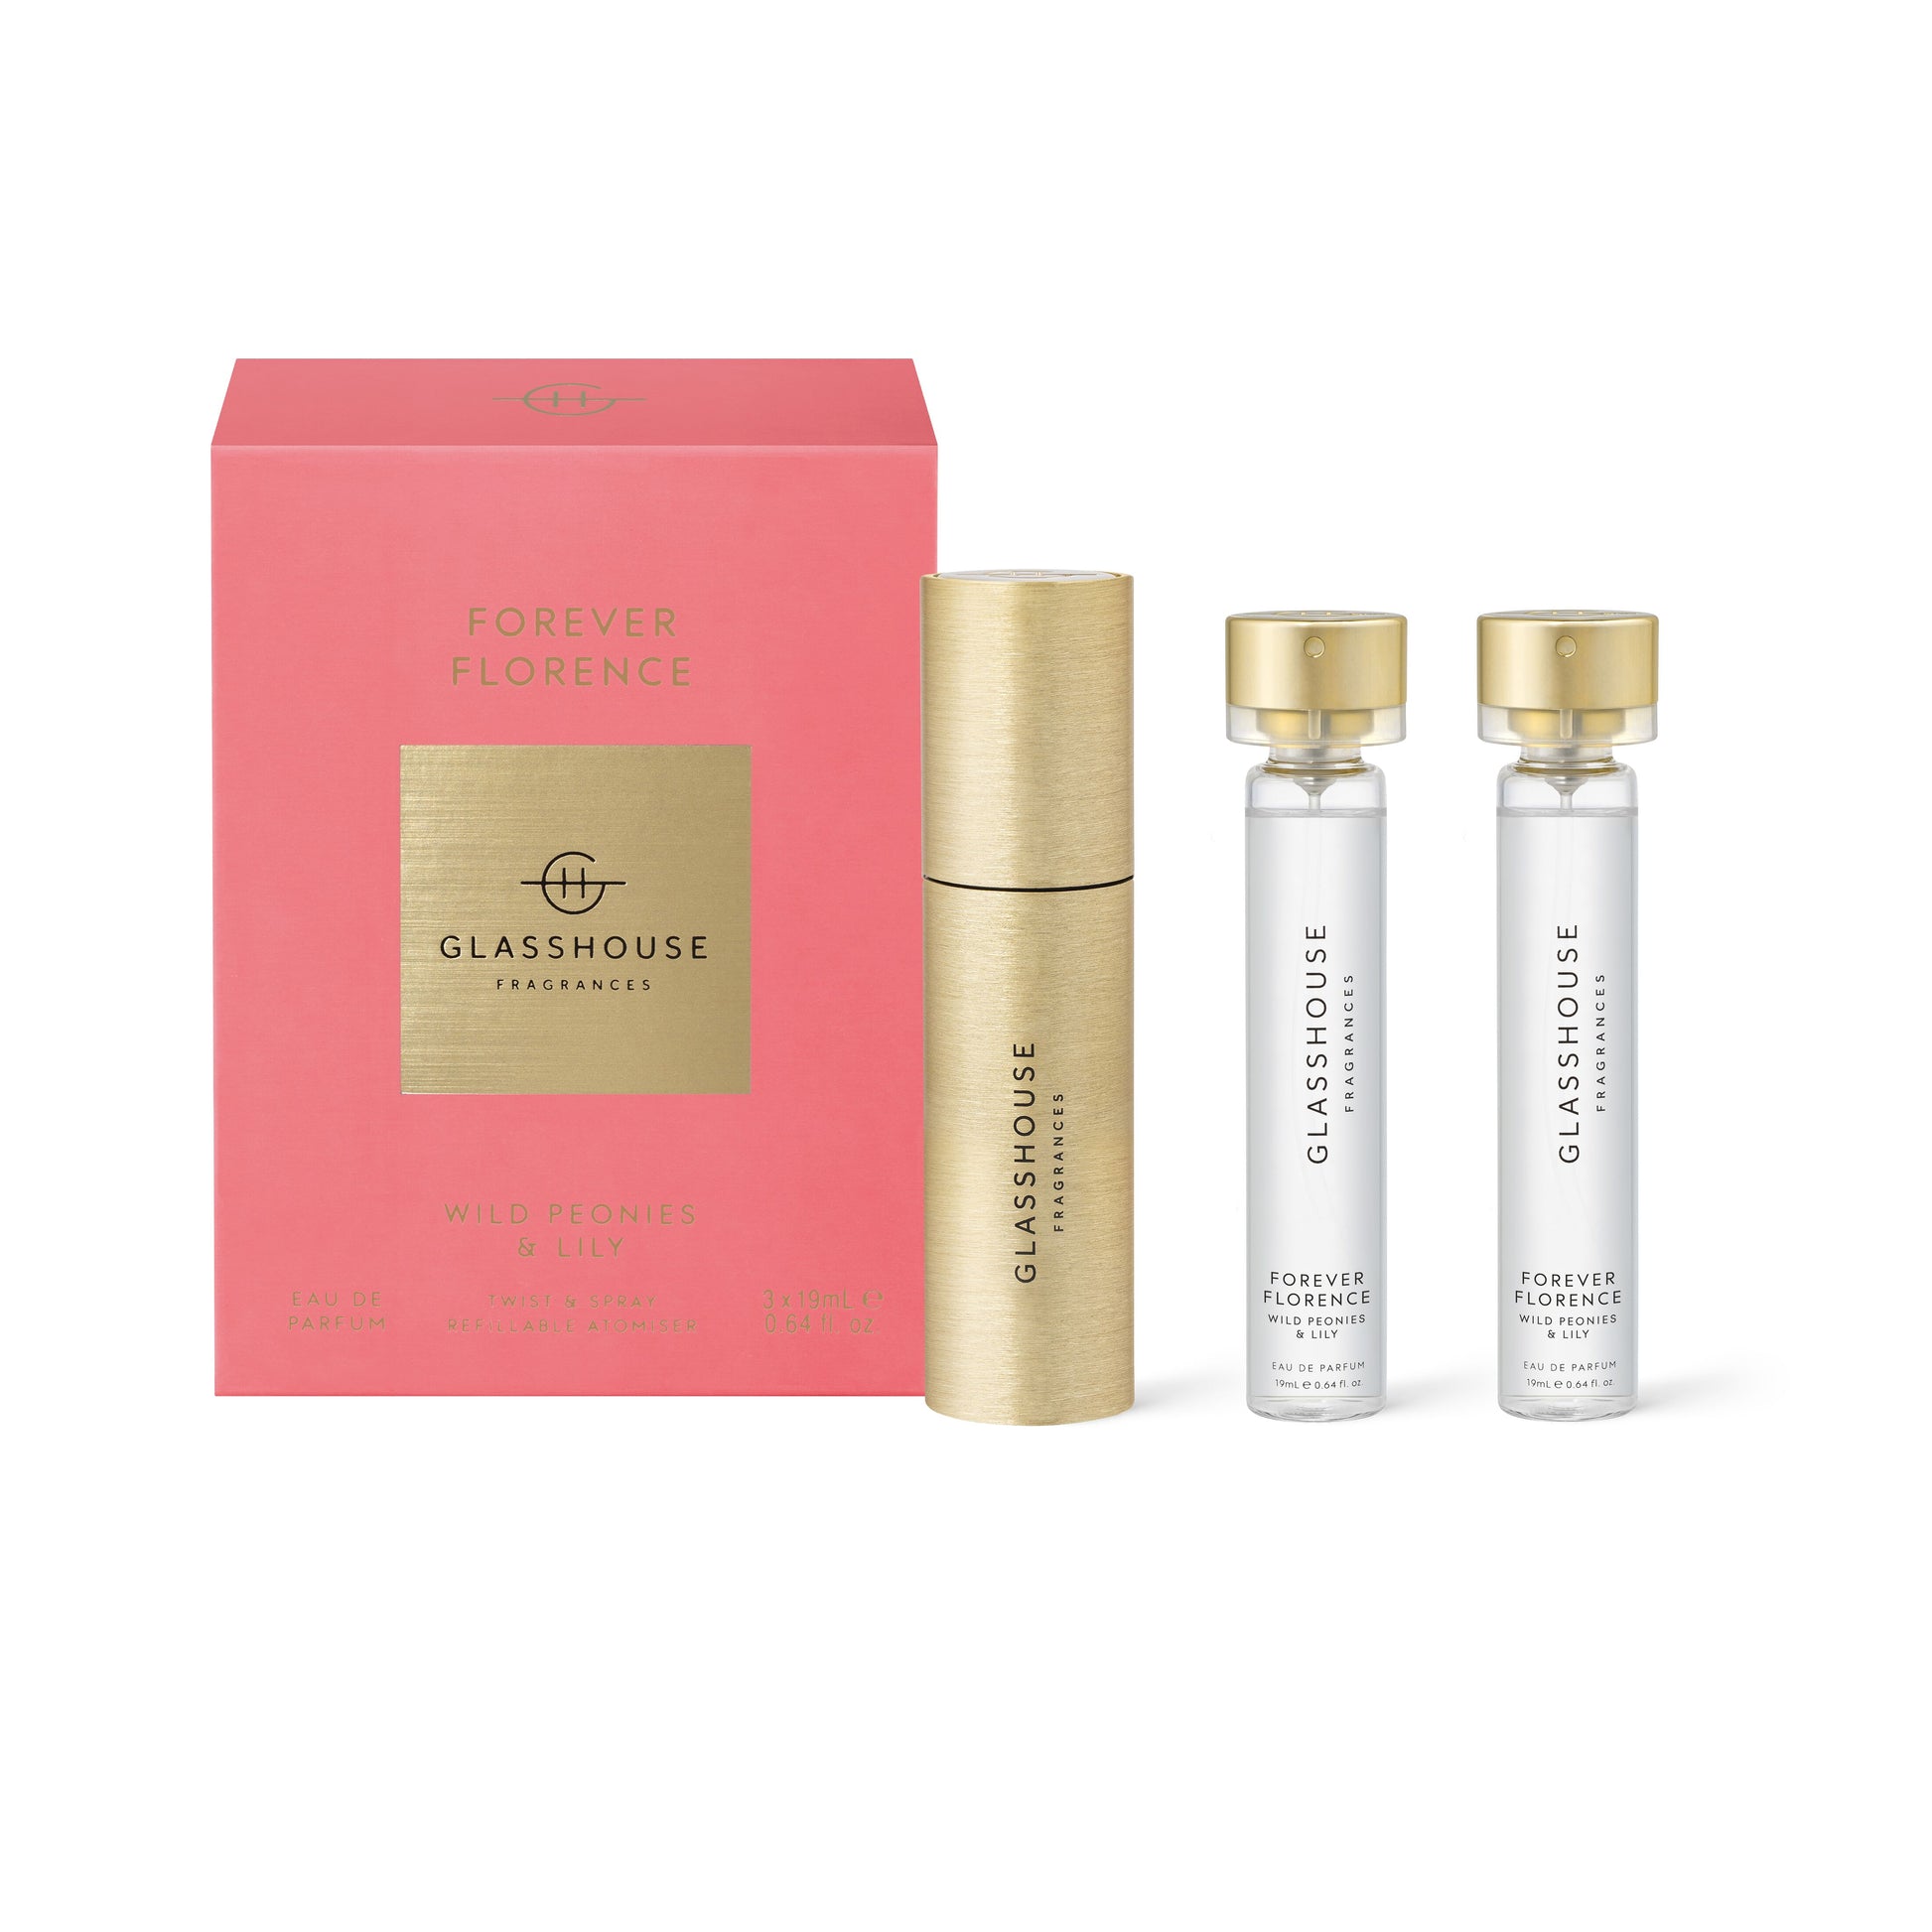 Florence EDP SET - GLASSHOUSE - candle diffusers, candles, GLASSHOUSE, on sale, parfum - Stomp Shoes Darwin